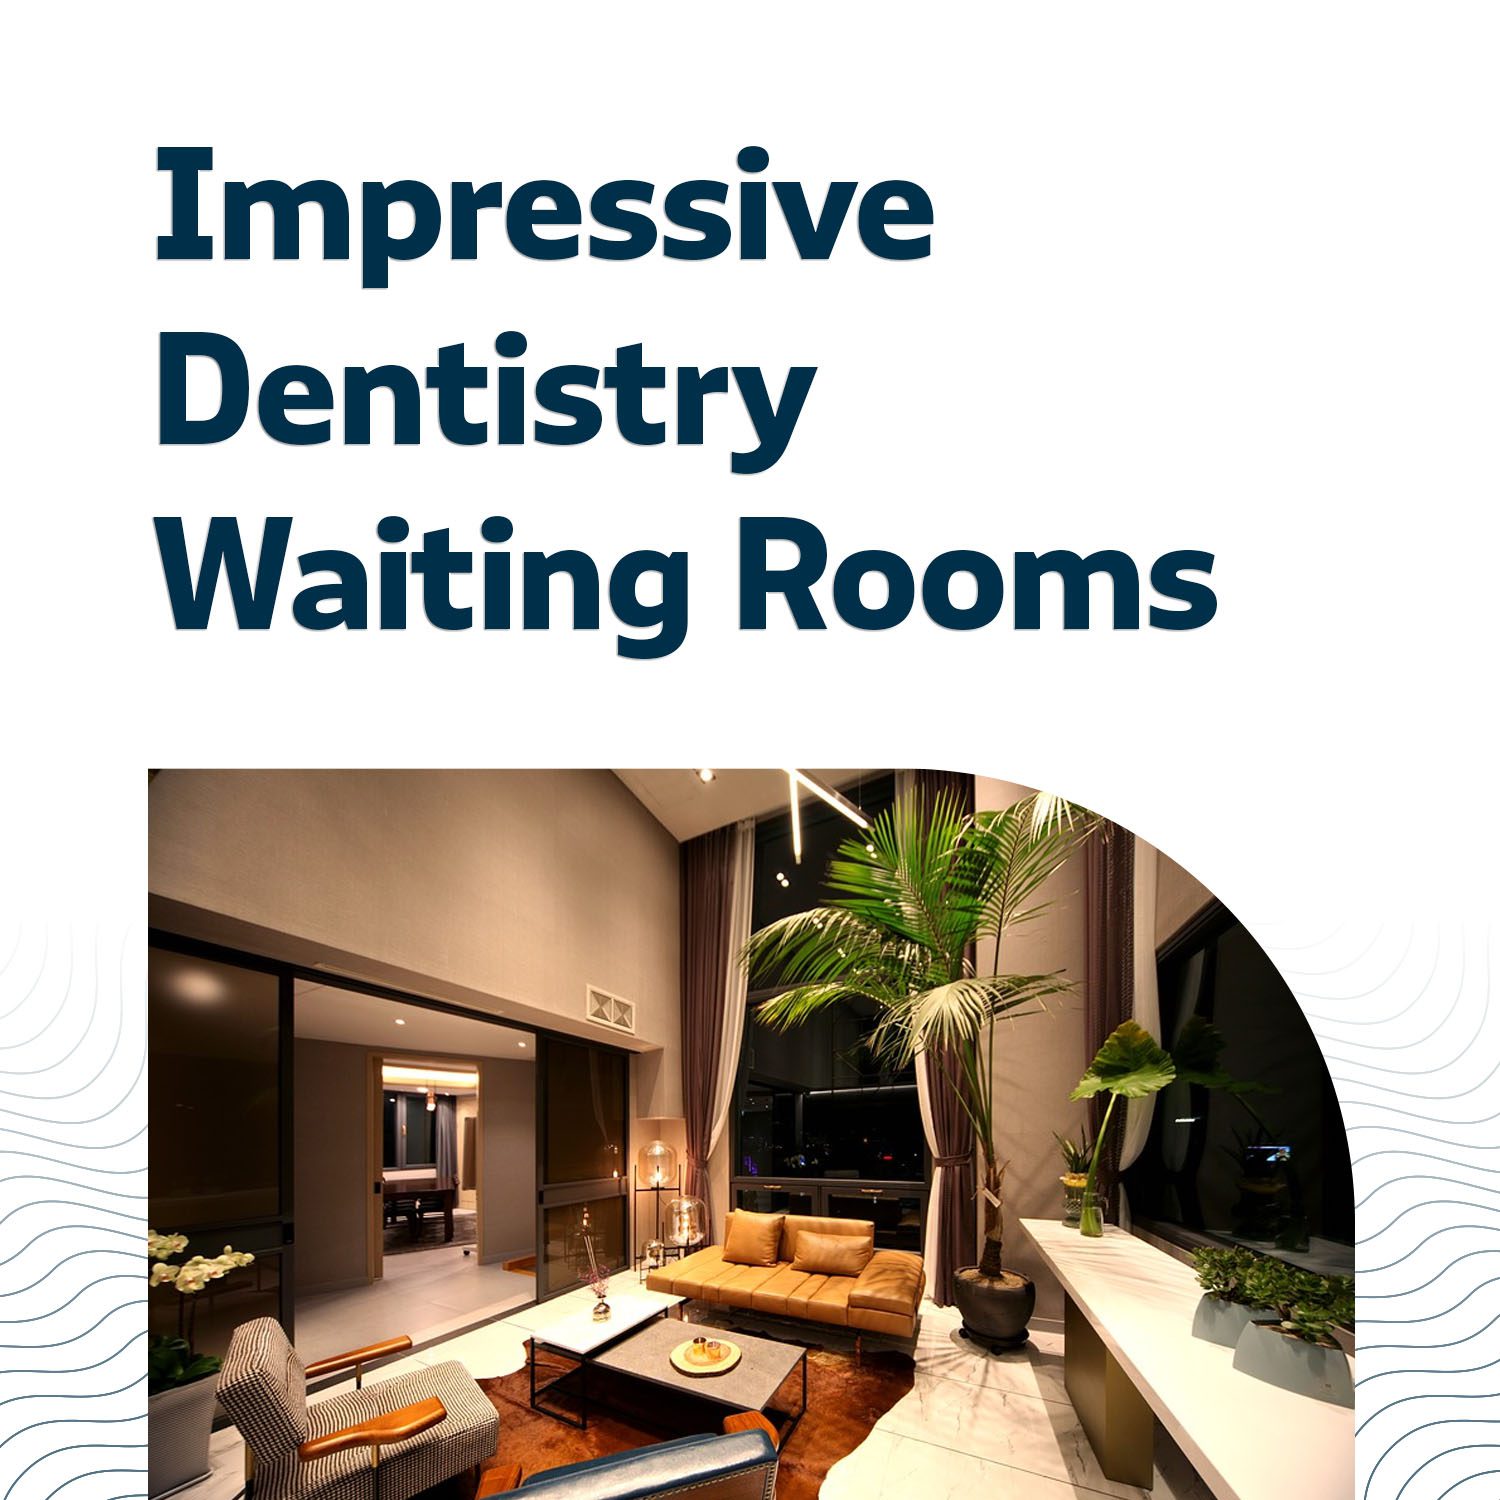 Impressing with the Dental Waiting Room